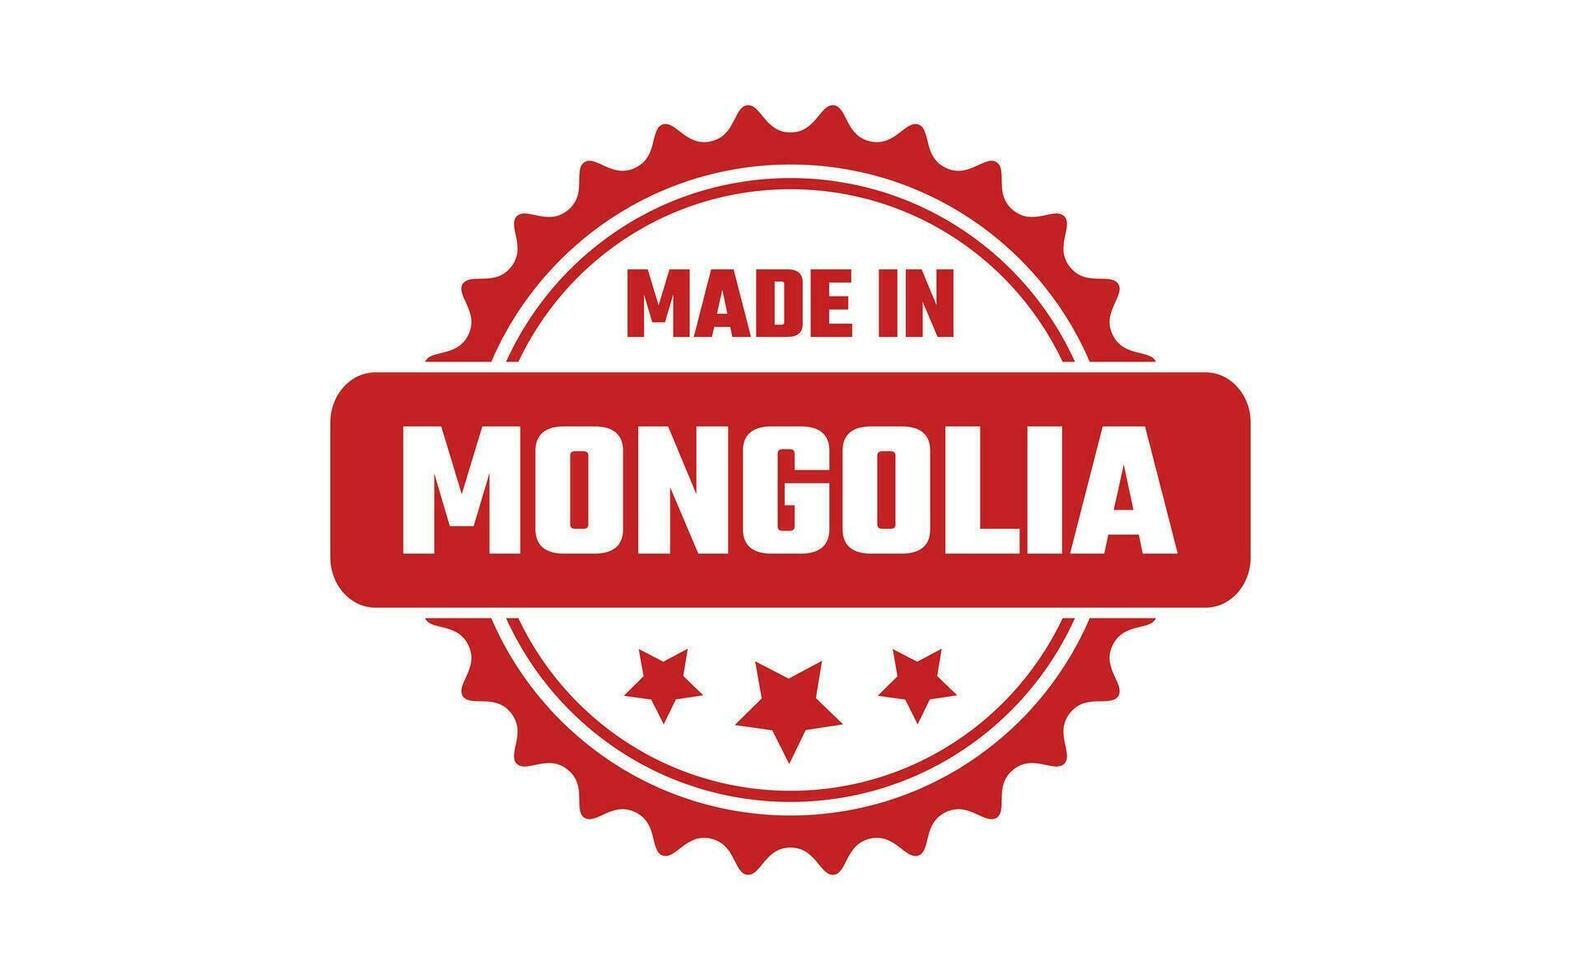 Made In Mongolia Rubber Stamp vector